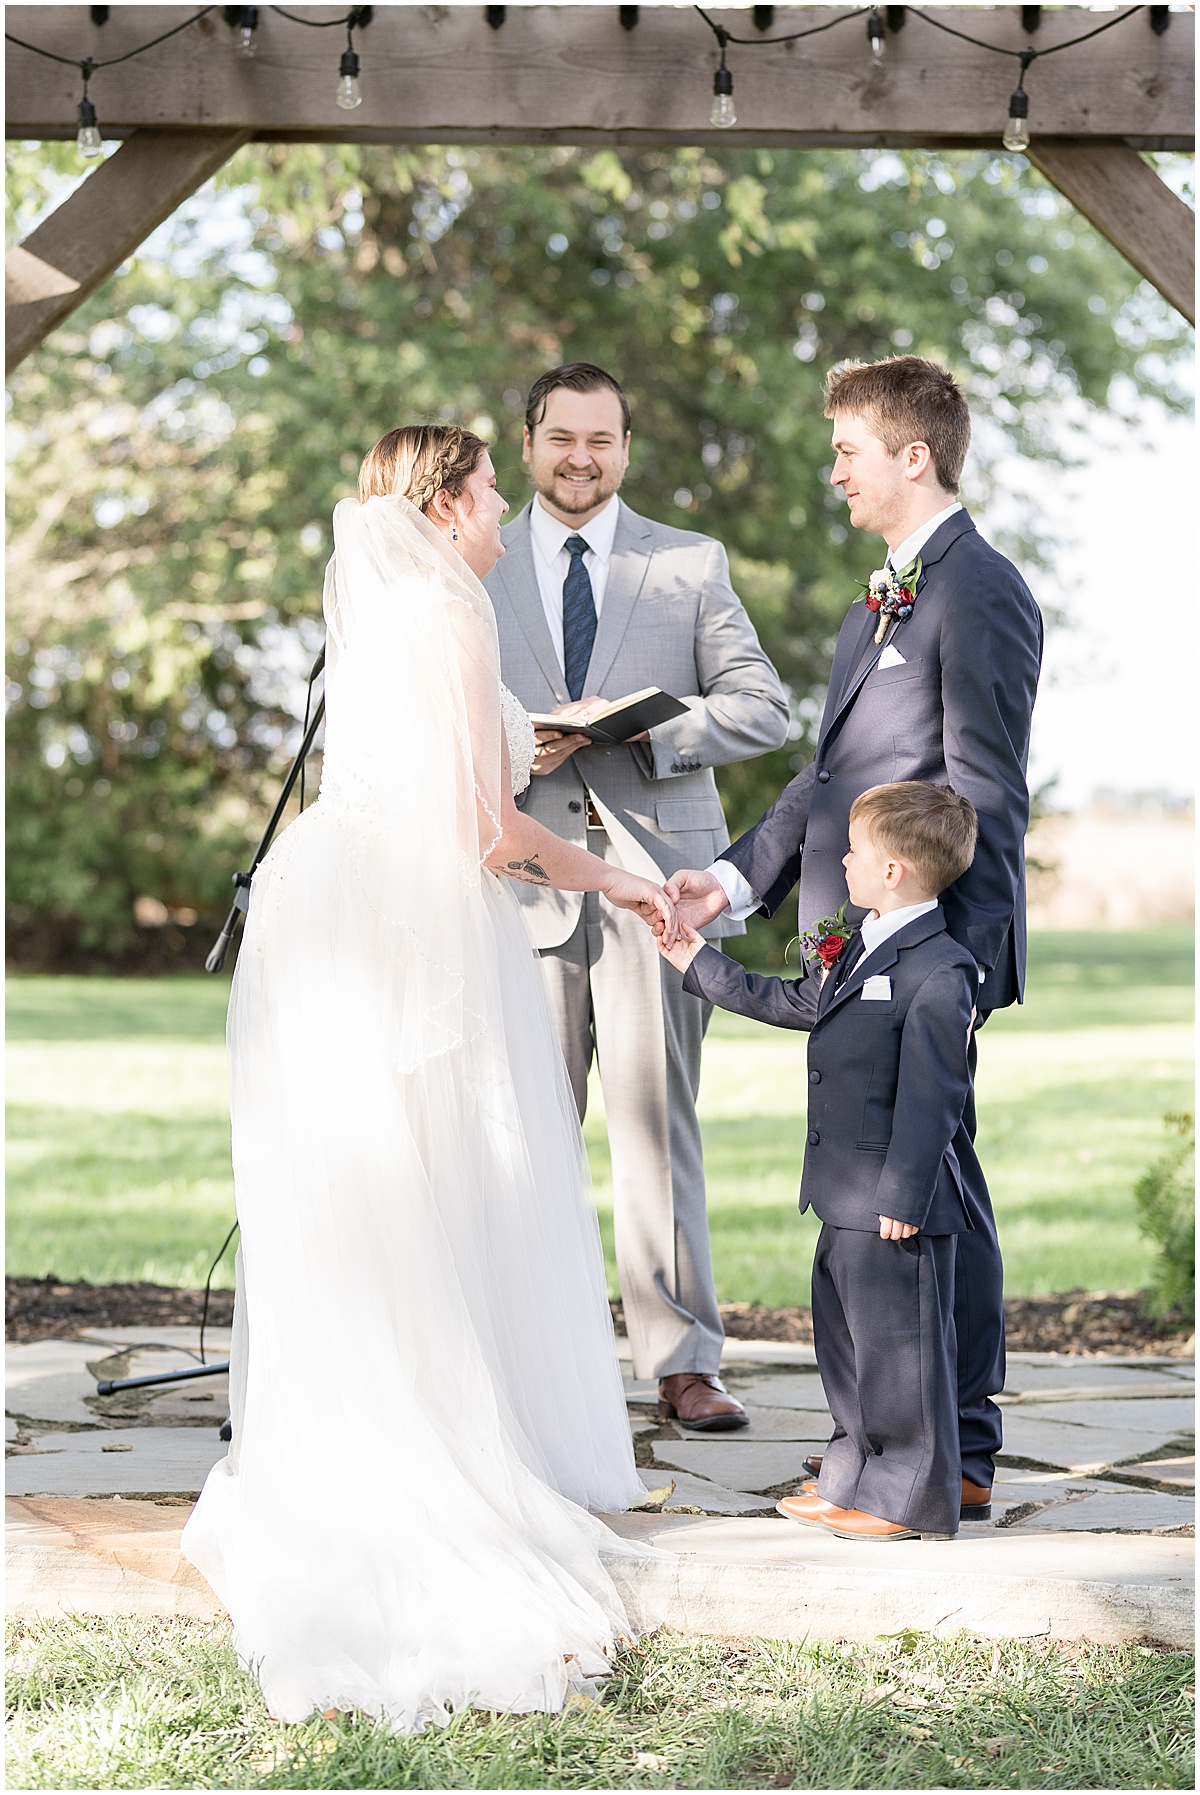 Ceremony of fall wedding at Vintage Oaks Banquet Barn in Delphi, Indiana